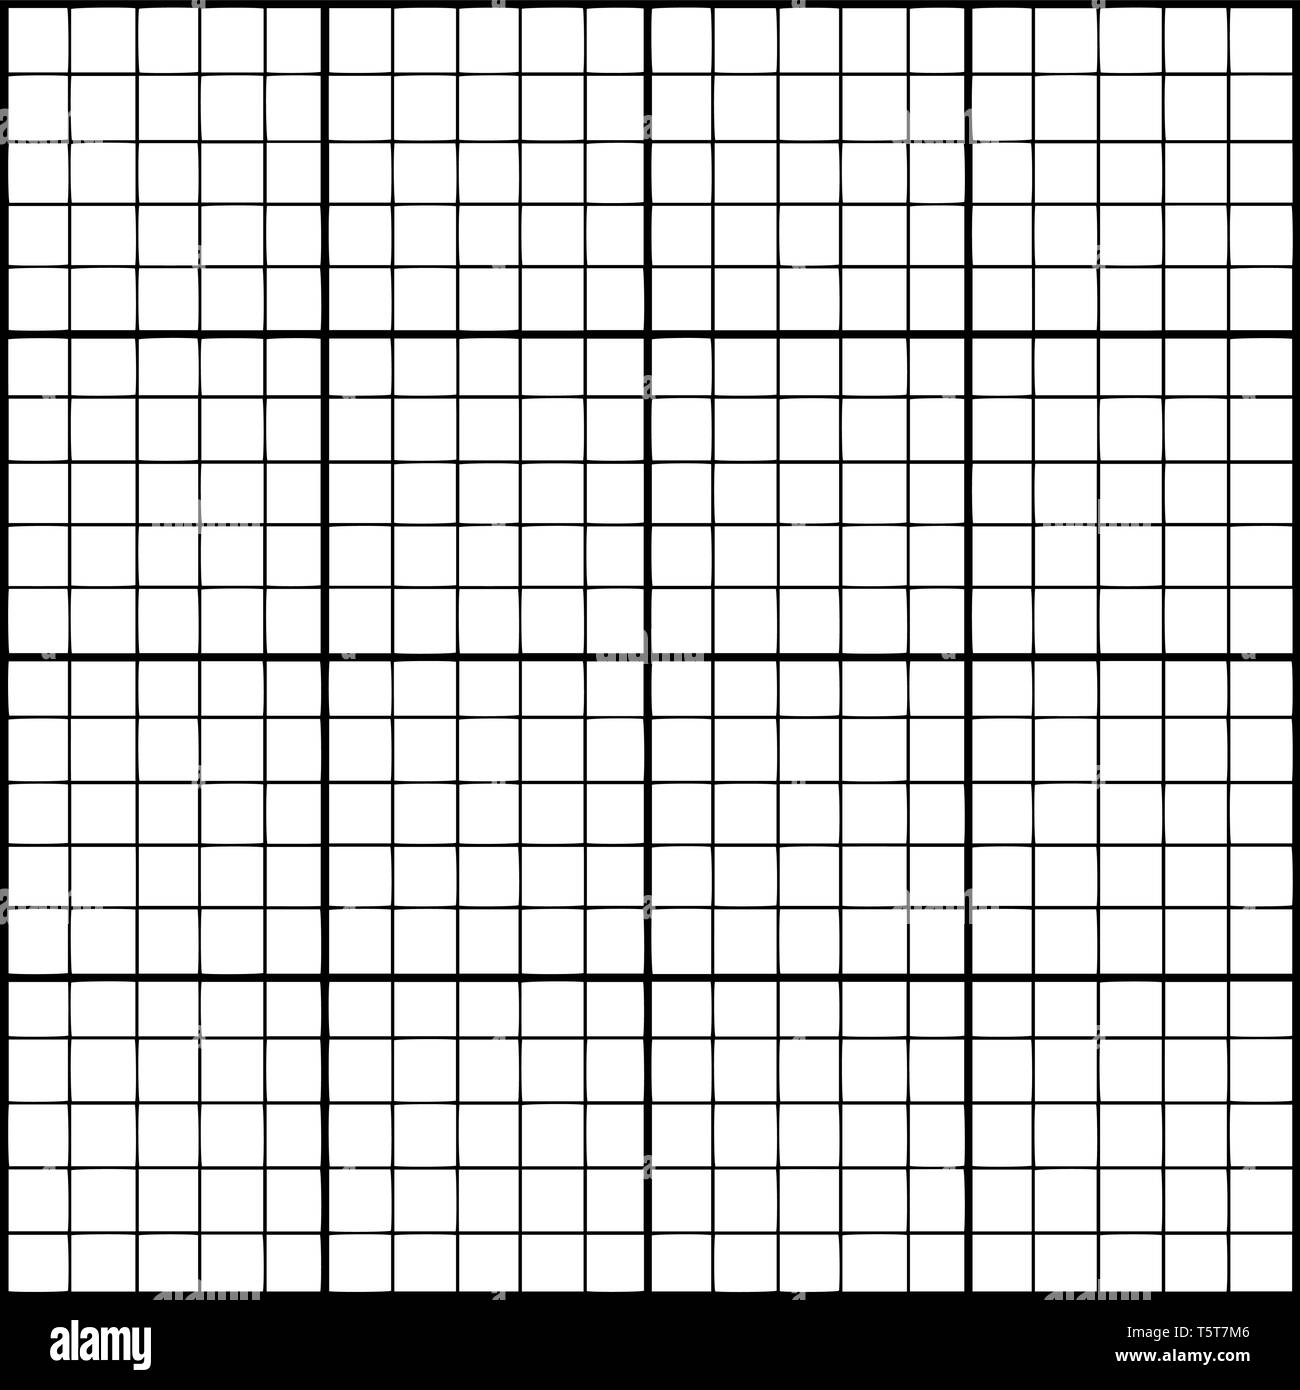 Image of a grid of 20 by 20, composed of grids of 16 smaller units, vintage line drawing or engraving illustration. Stock Vector